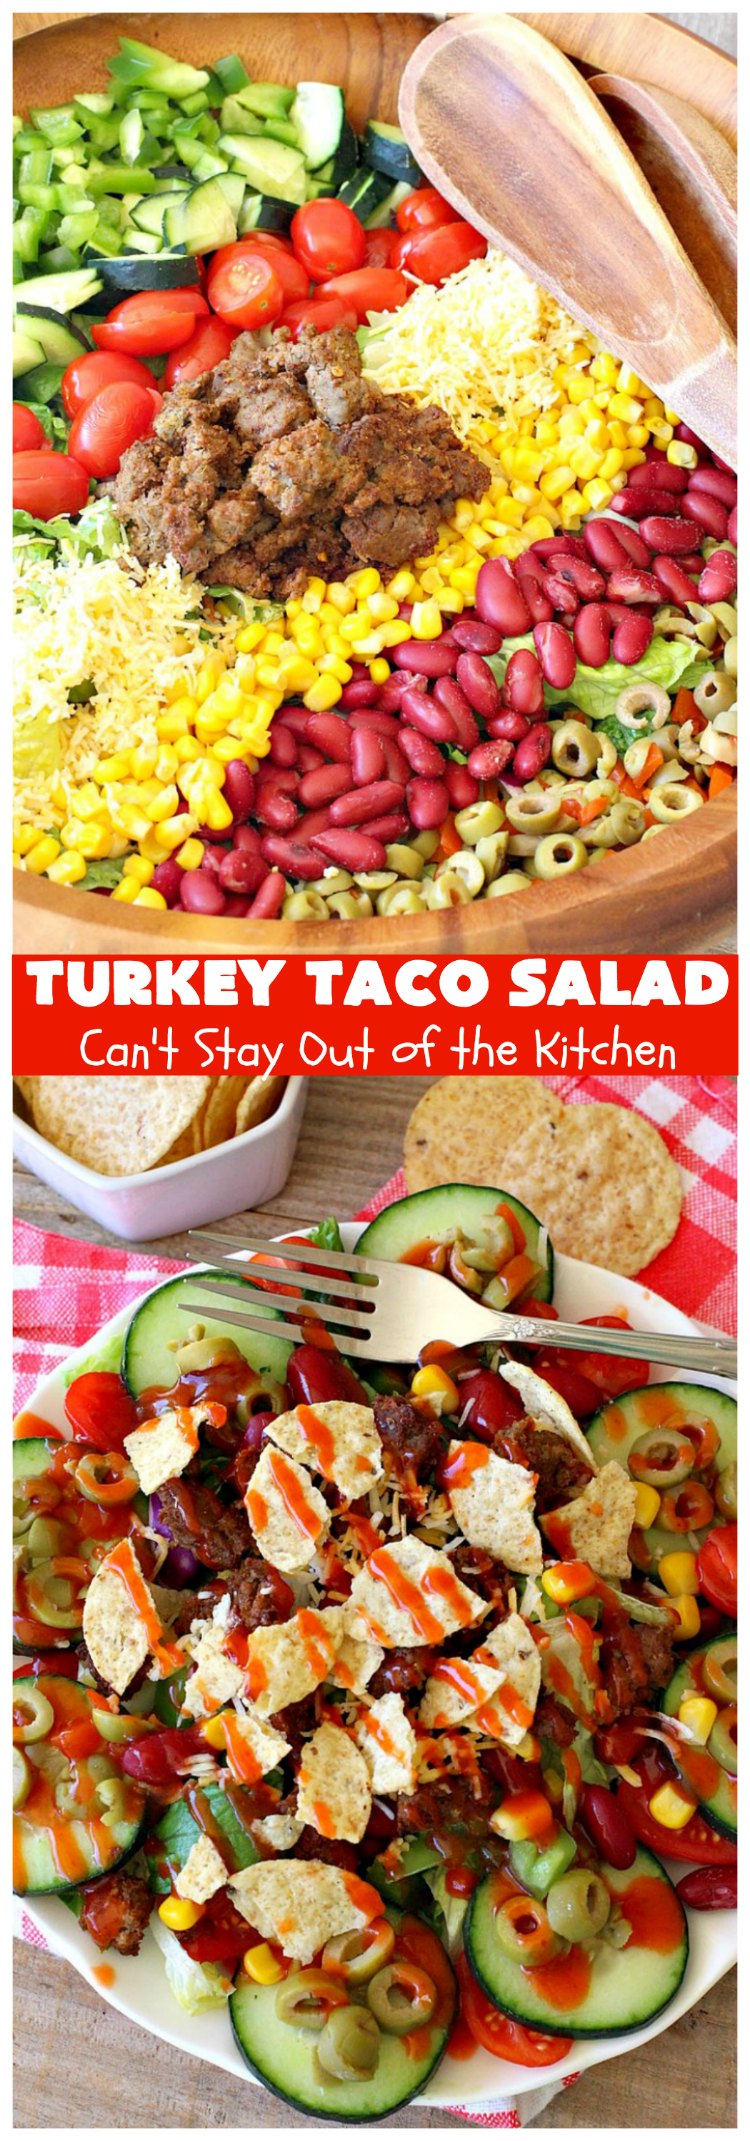 Turkey Taco Salad | Can't Stay Out of the Kitchen | healthier, #LowCalorie version of #TacoSalad. This one uses #TurkeySausage to give it a nice #TexMex kick. Terrific one-dish meal. #GlutenFree #turkey #healthy #TurkeyTacoSalad